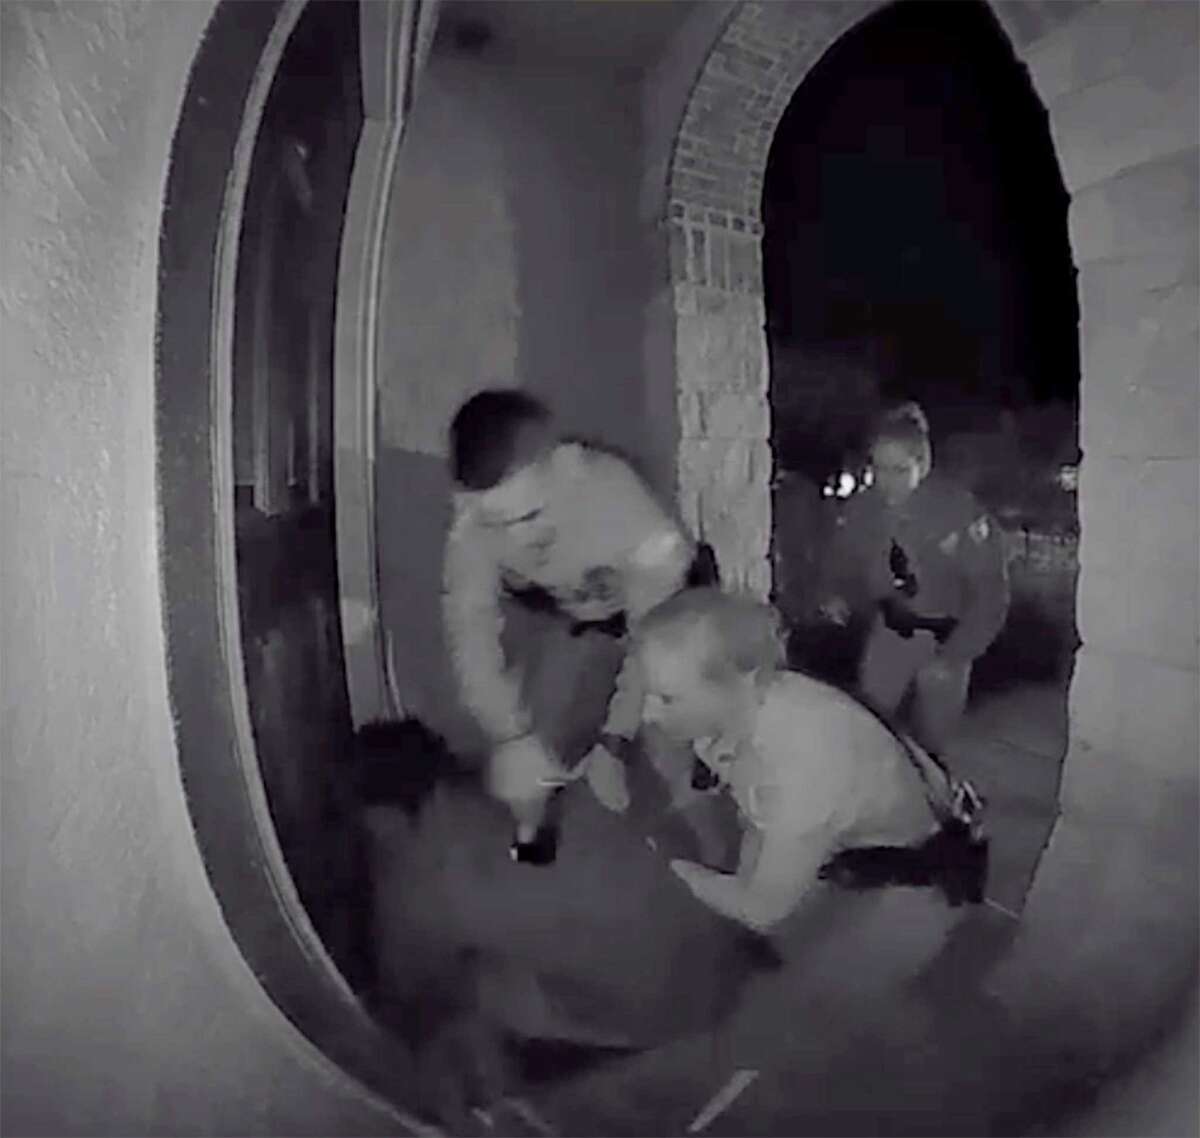 A screen grab from a home surveillance video shows Schertz police officers tasing and forcibly restraining Zekee Rayford, 18, on the front steps of his home.